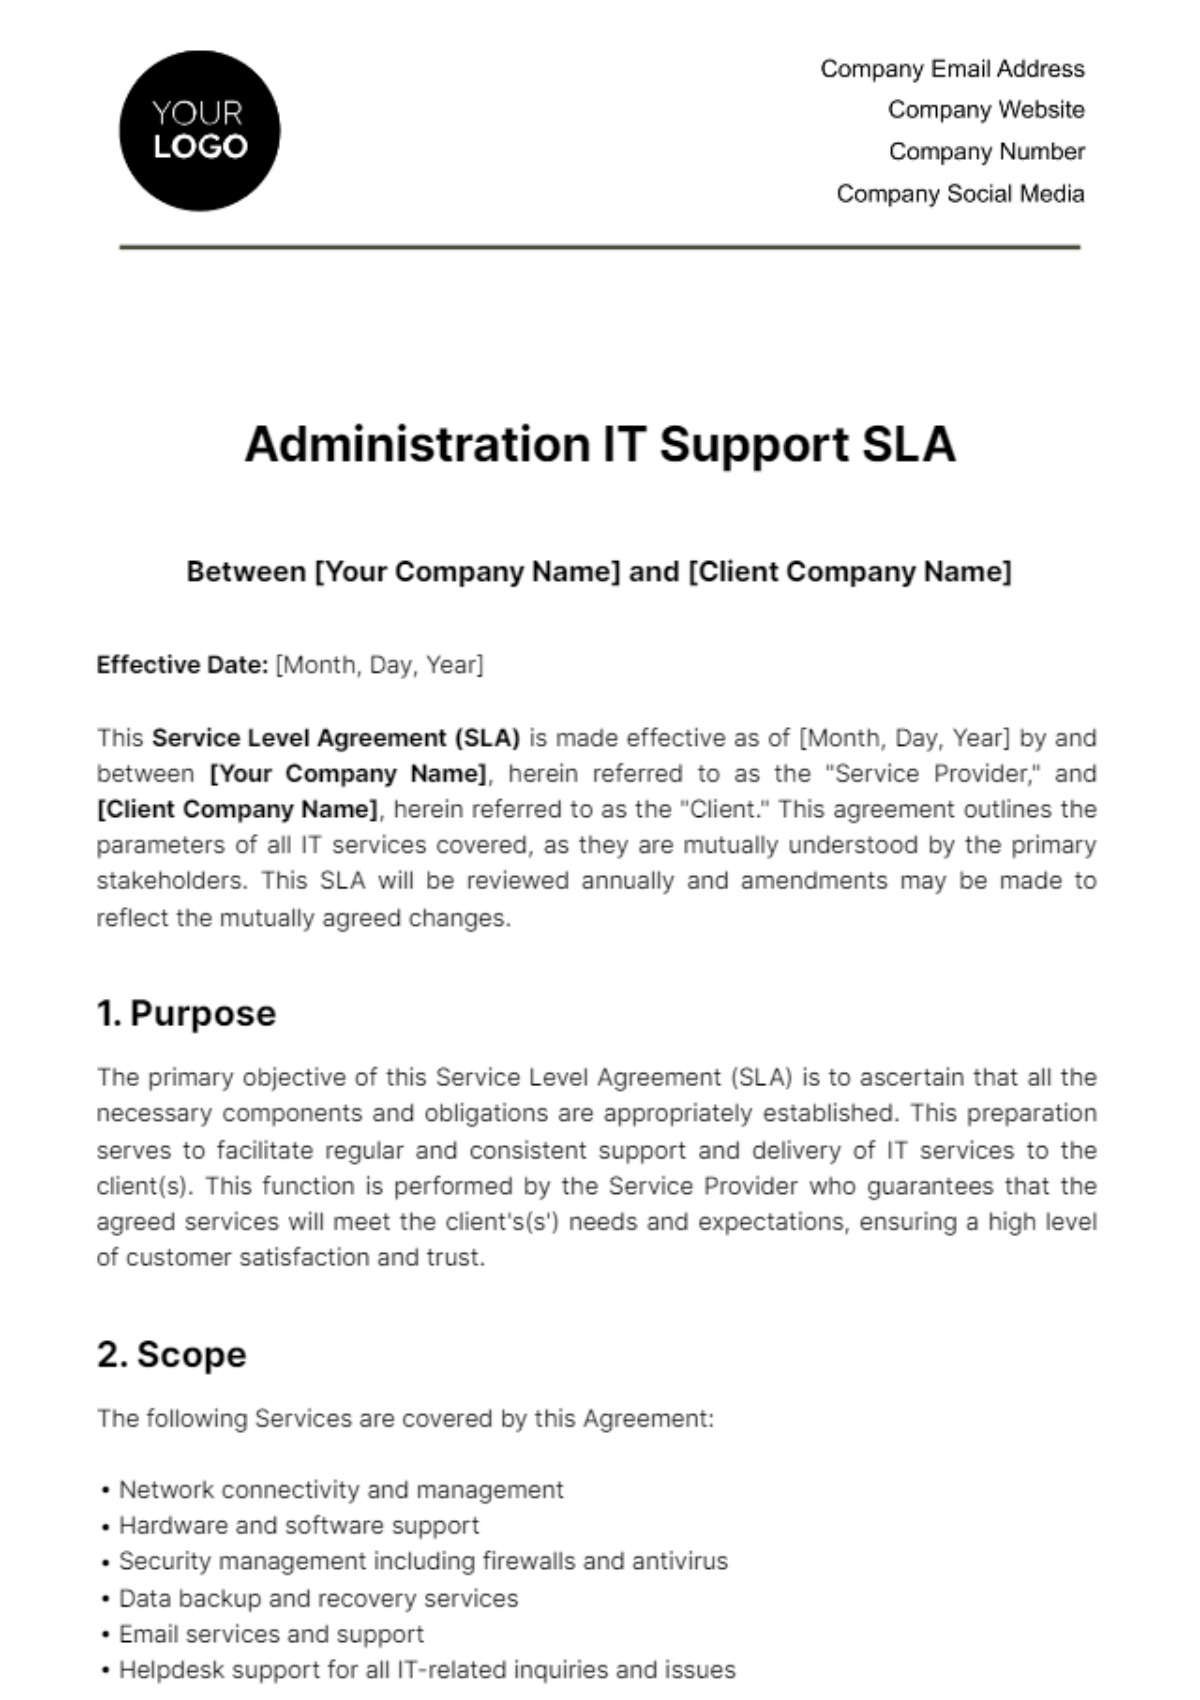 Administration IT Support SLA Template